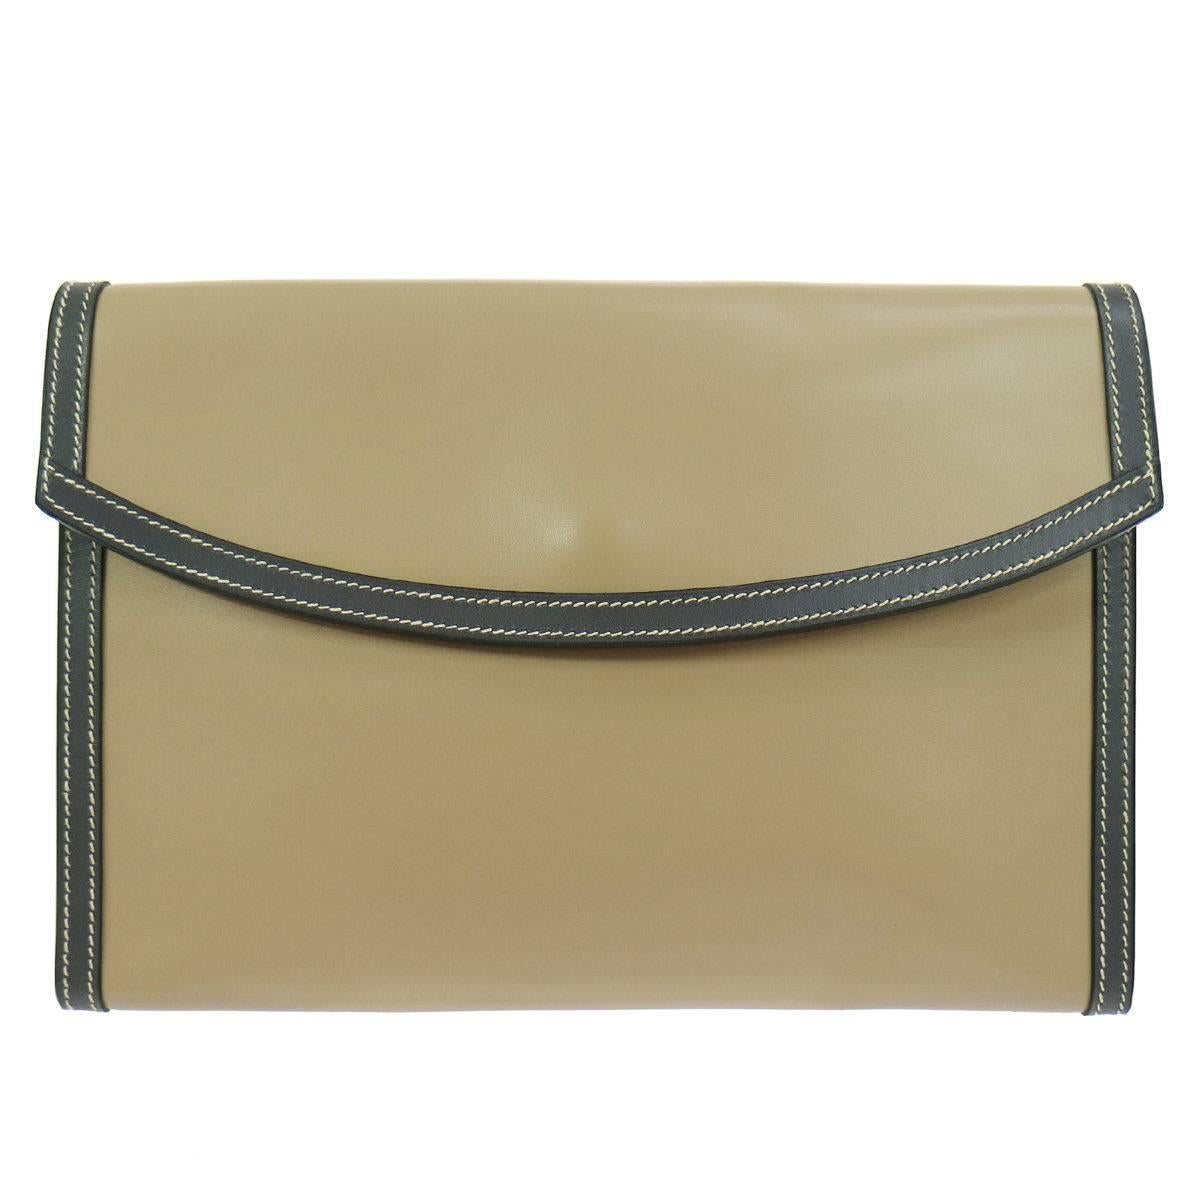 Hermes Rare Taupe Leather Envelope Evening Flap Clutch Bag in Dust Bag